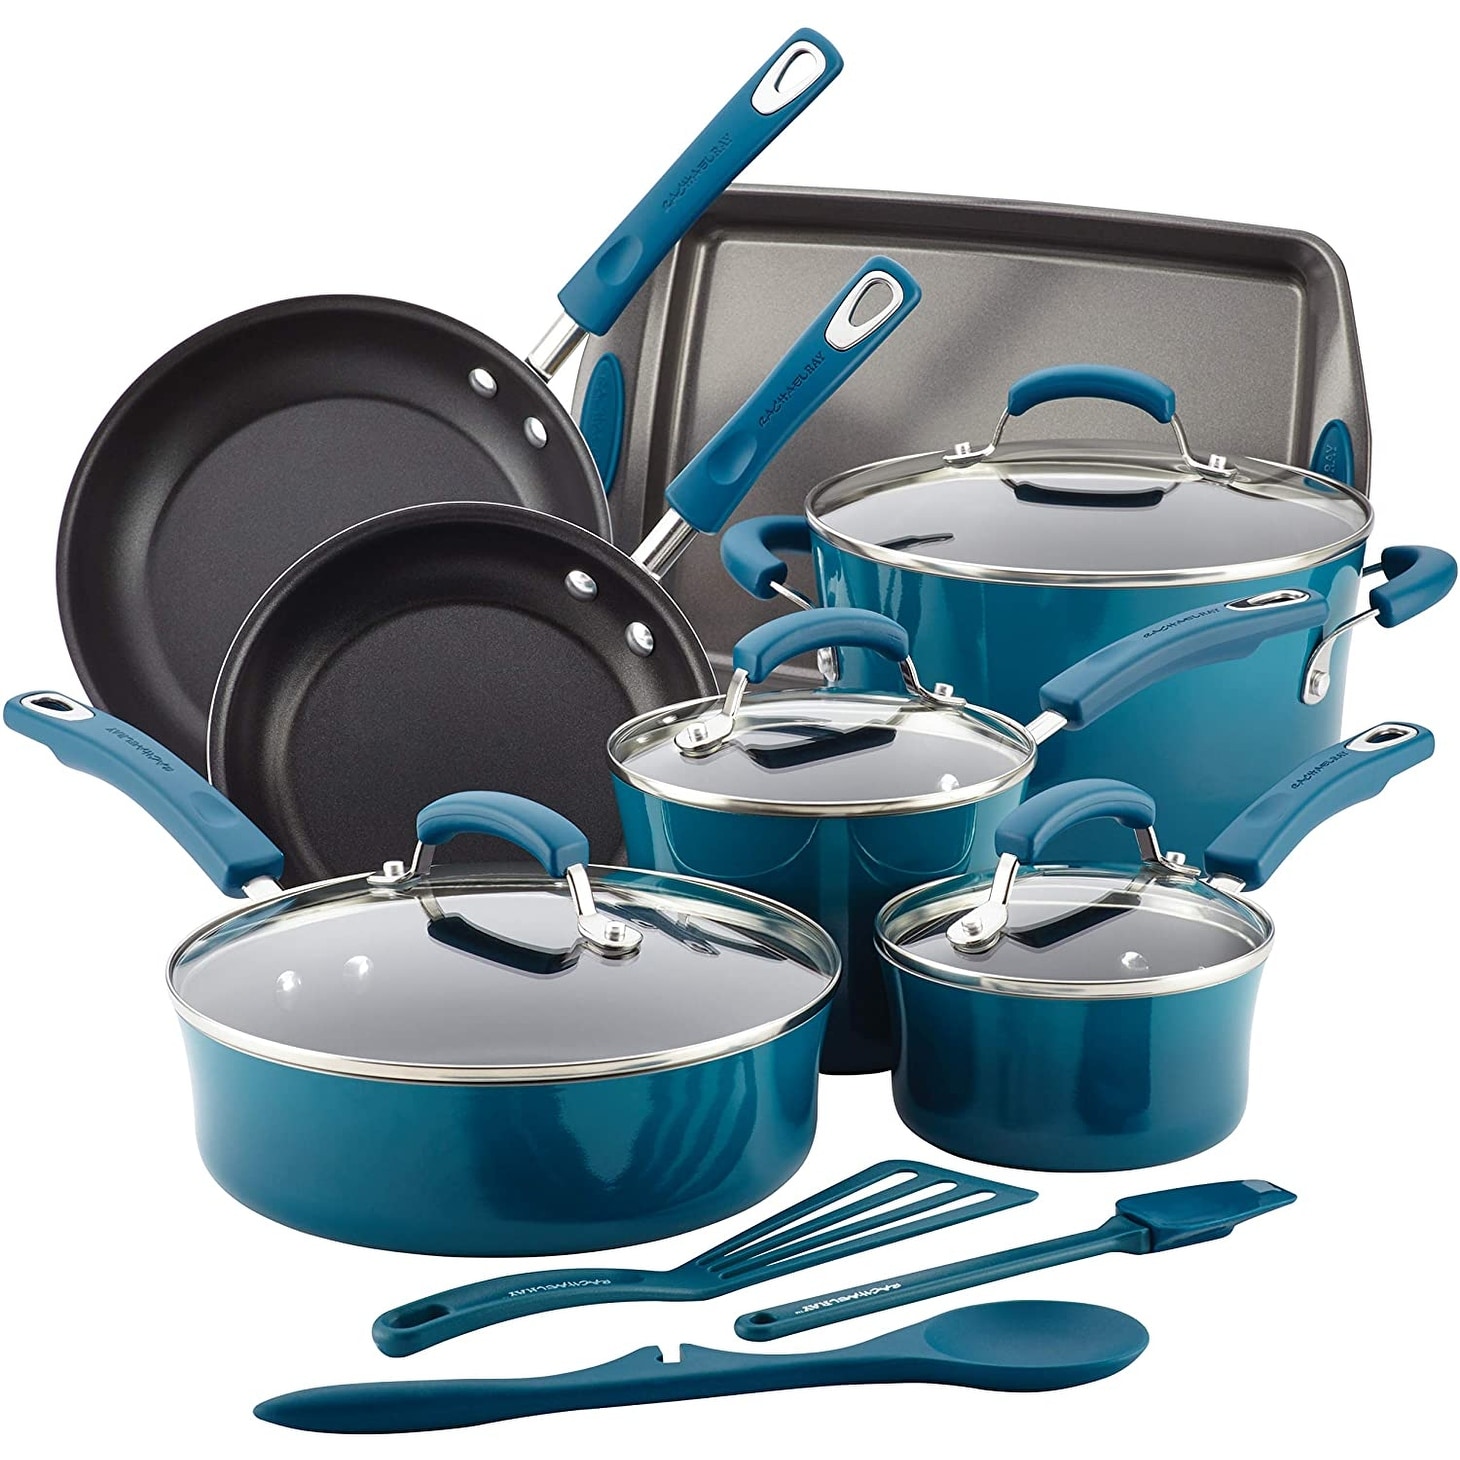 https://ak1.ostkcdn.com/images/products/is/images/direct/4f8678e7523ac1bb30ad6f1acf99e6adcc197522/Rachael-Ray-17629-Porcelain-CookwareSet%2C-14-Piece%2CMarine-Blue-Gradient.jpg